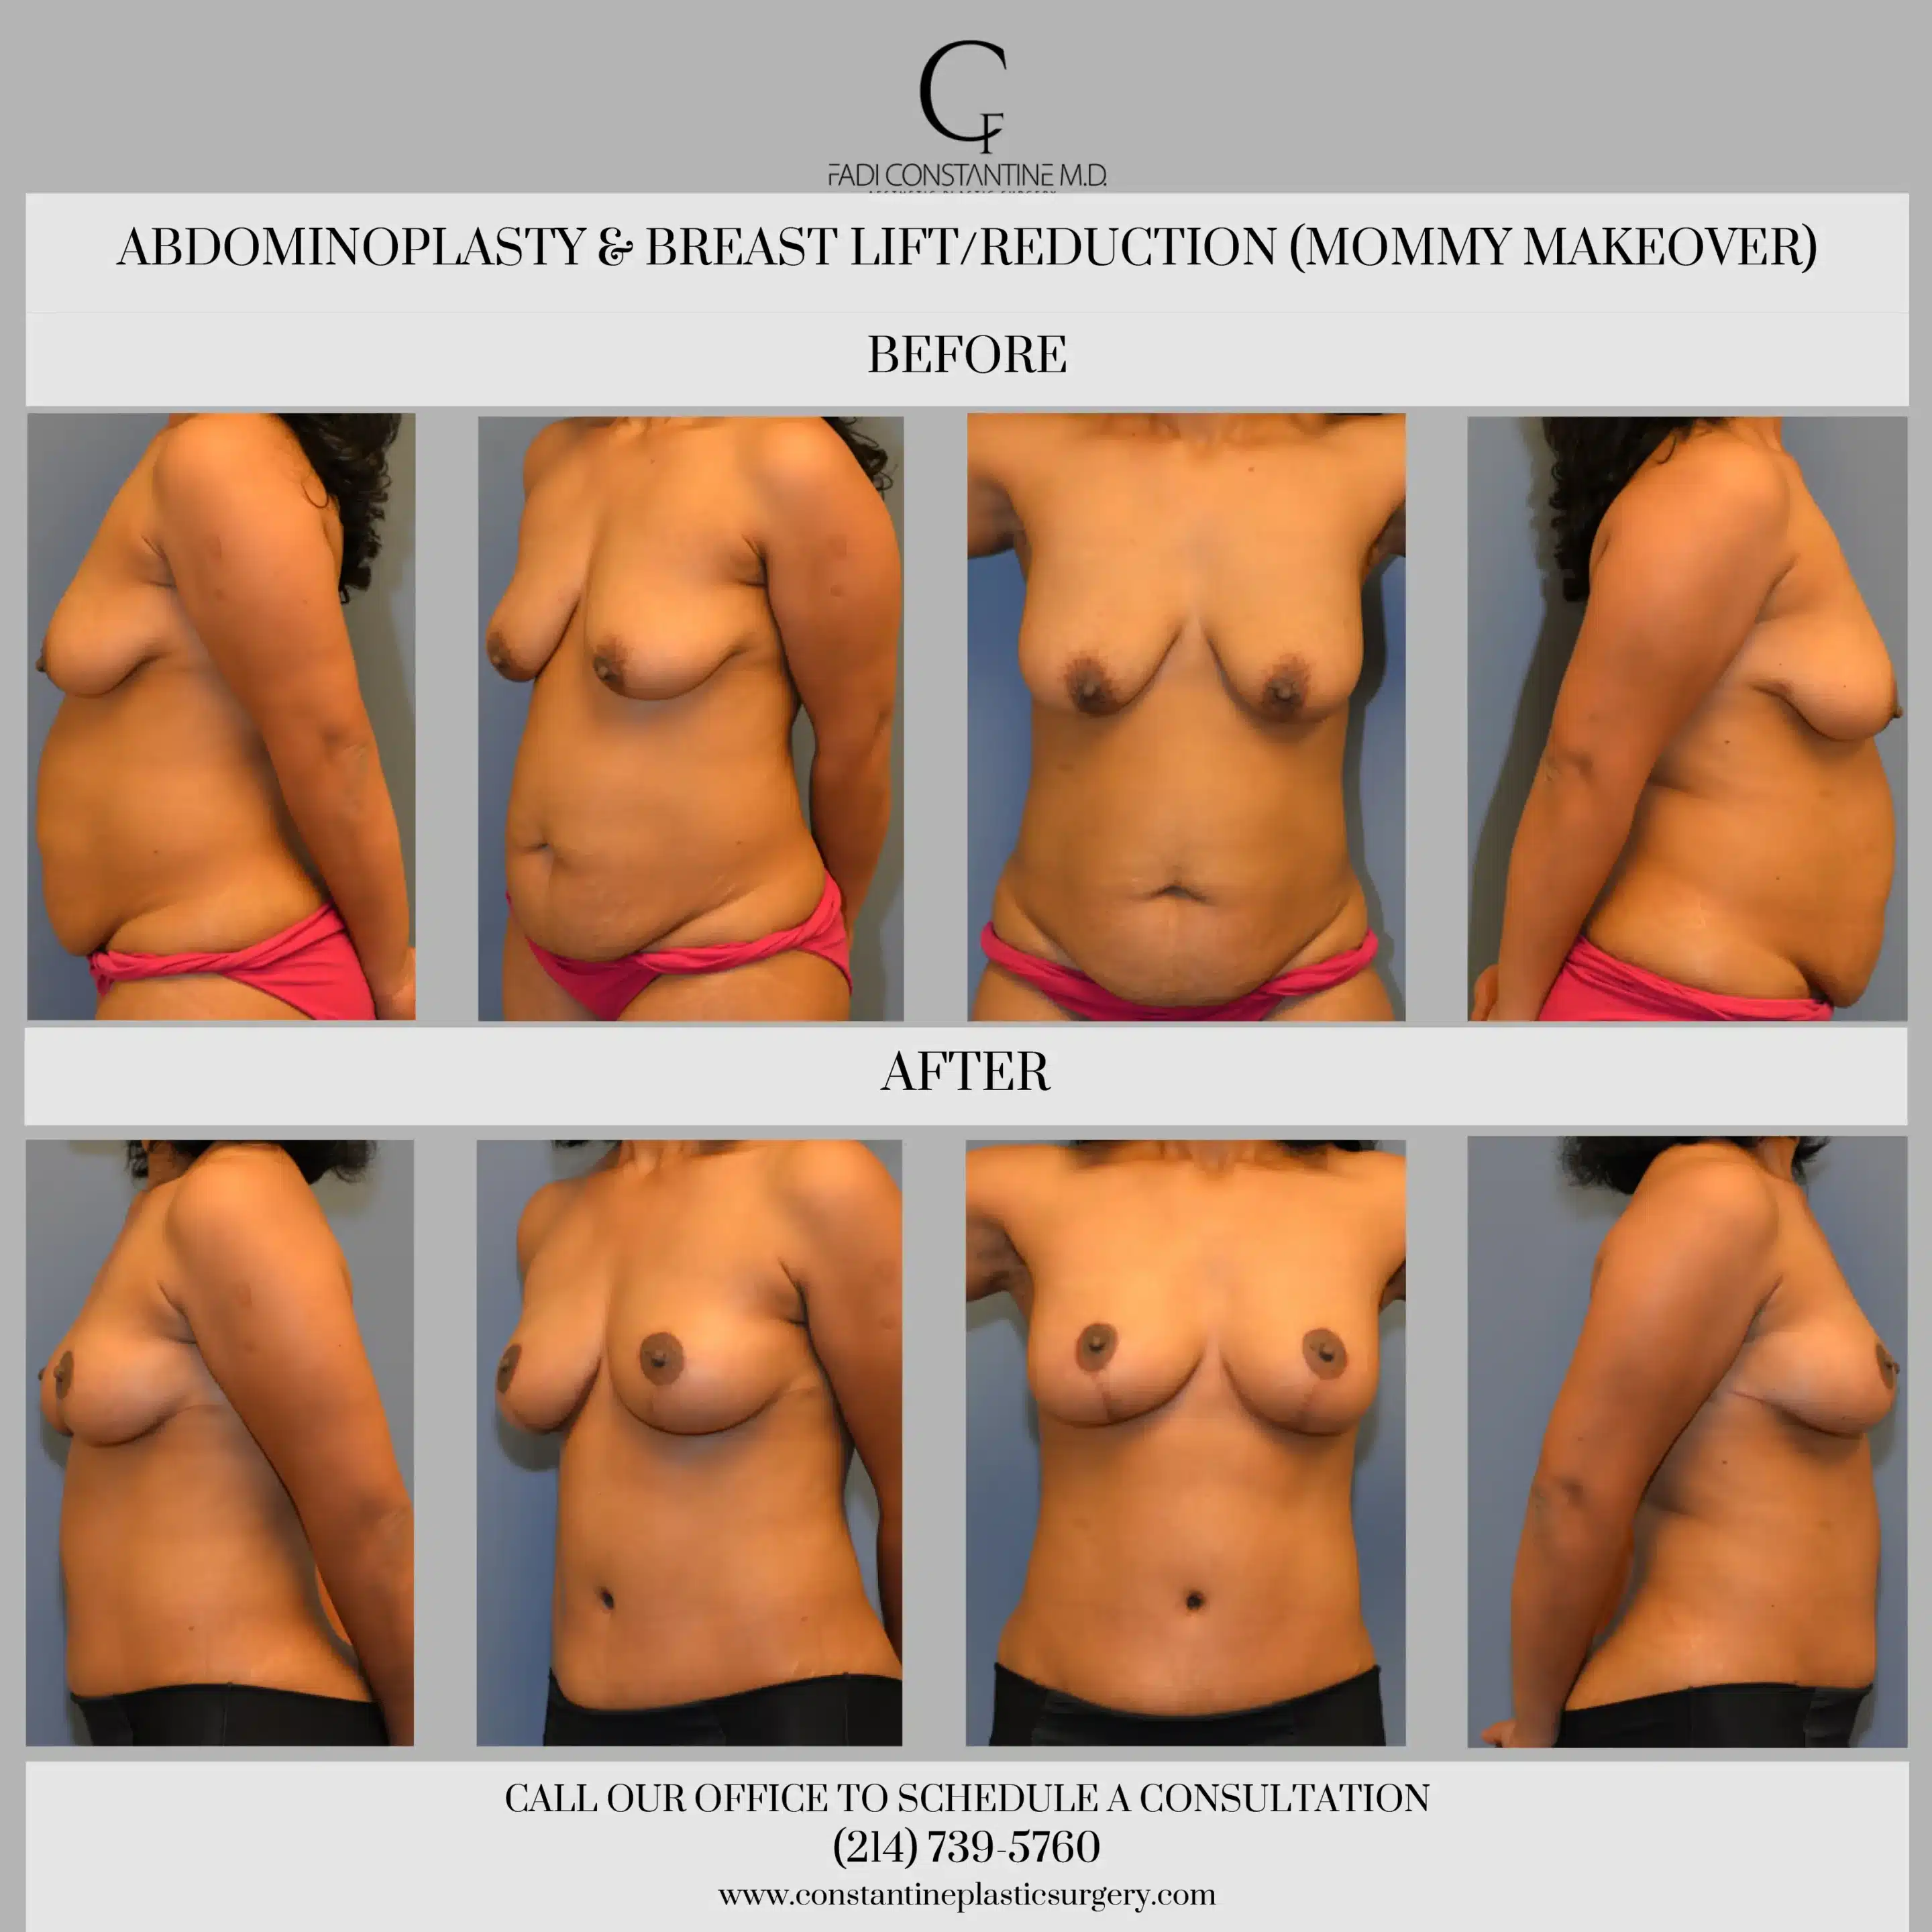 Find Comfort and Confidence with Breast Reduction